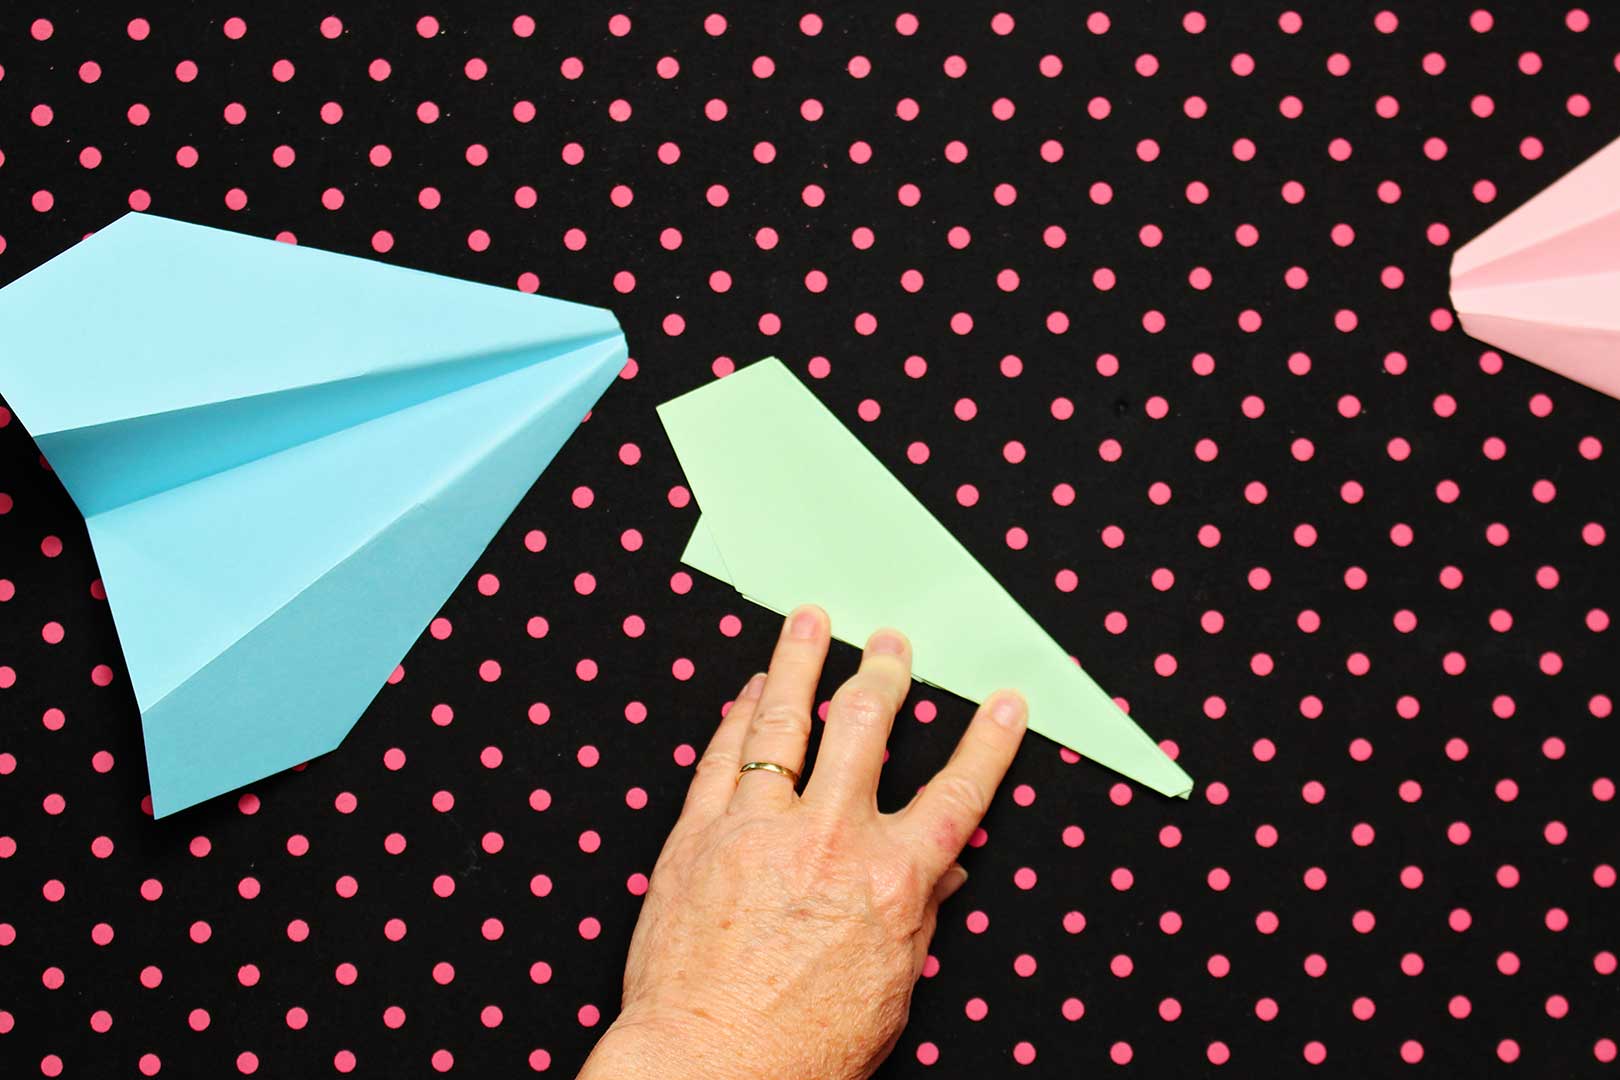 A hand showing individual folds instructing how to make a paper airplane out of green paper. Two finished planes sit next to it on a black and pink polka dotted background.